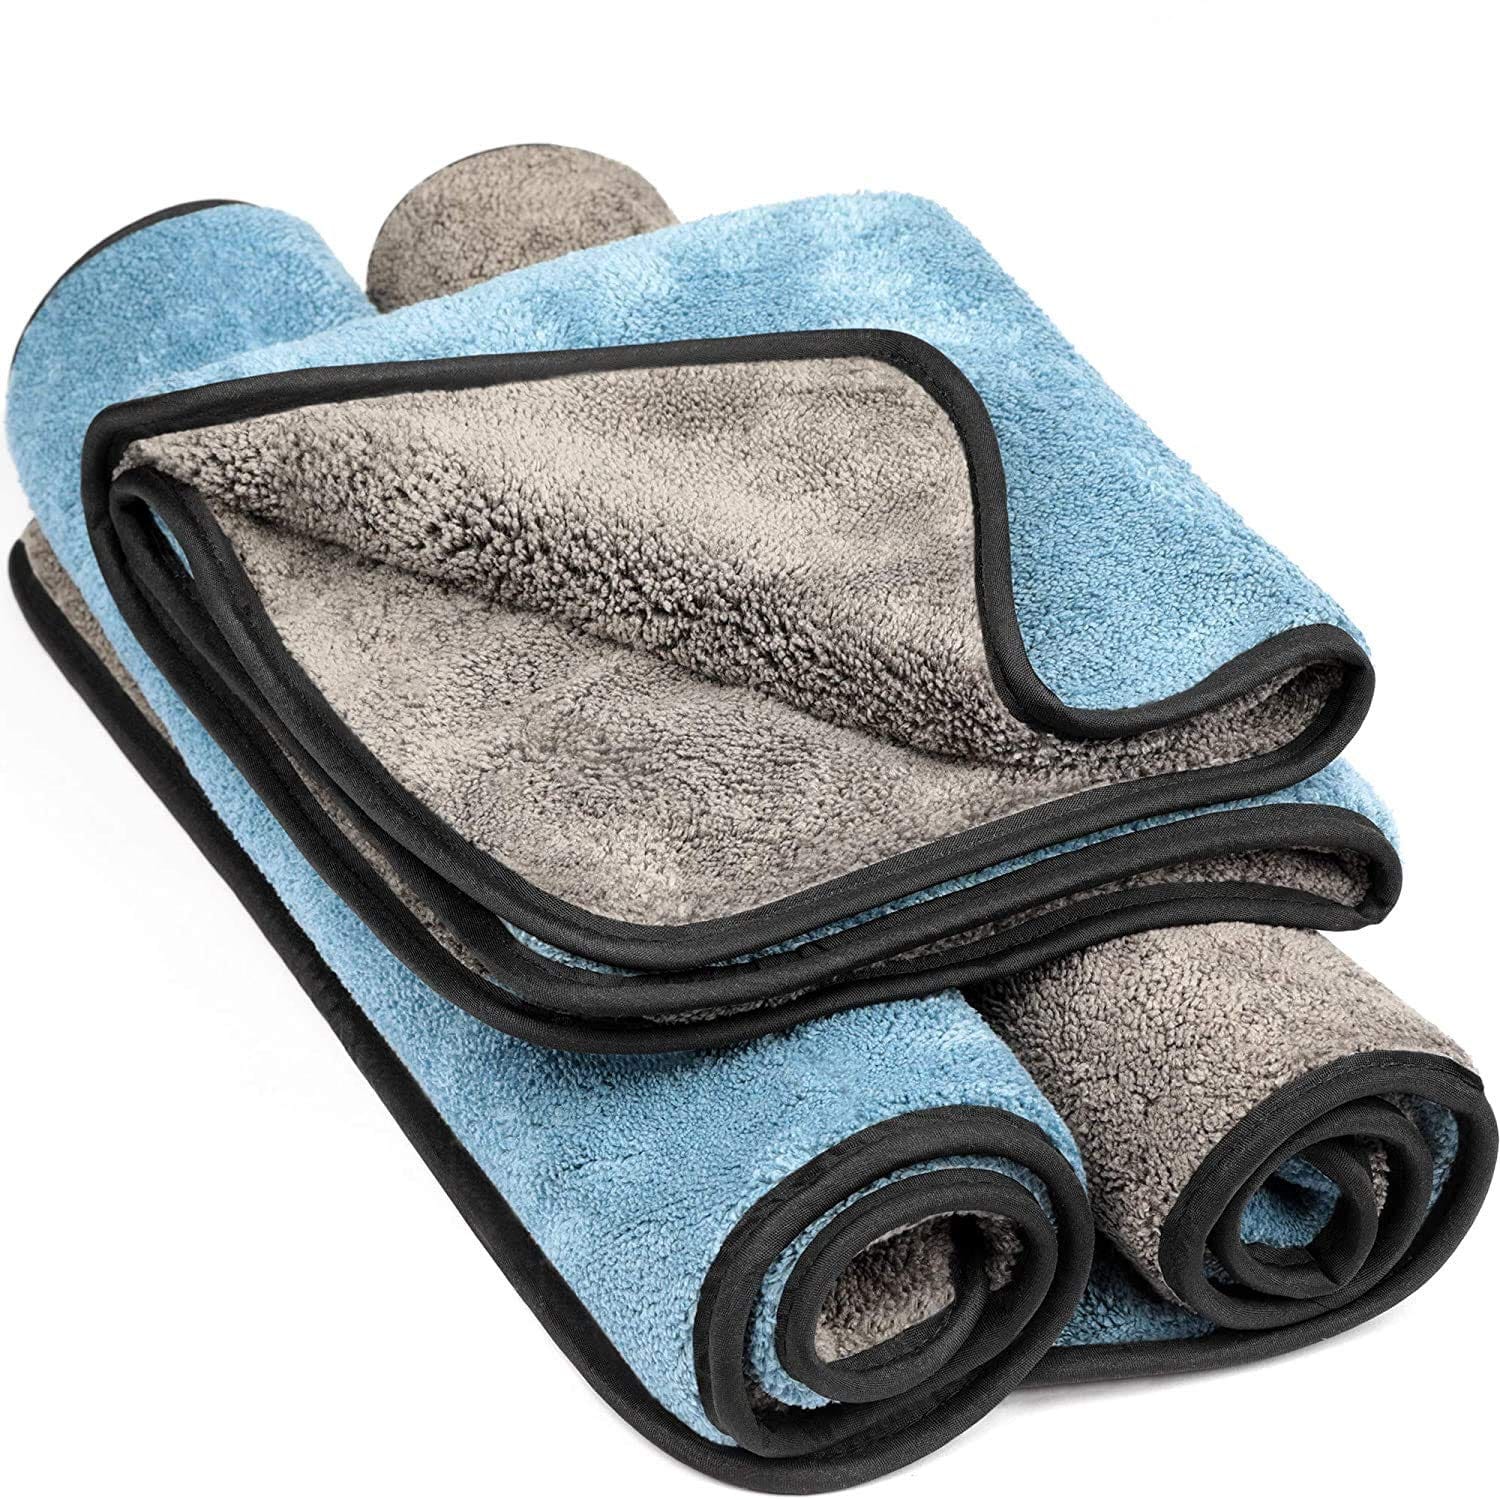 Relentless Drive Large Car Drying Towel 24” x 60” (5 Pack) - Microfiber  Towels for Cars - Ultra Absorbent Drying Towels for Cars, Boats, & SUVs -  Car